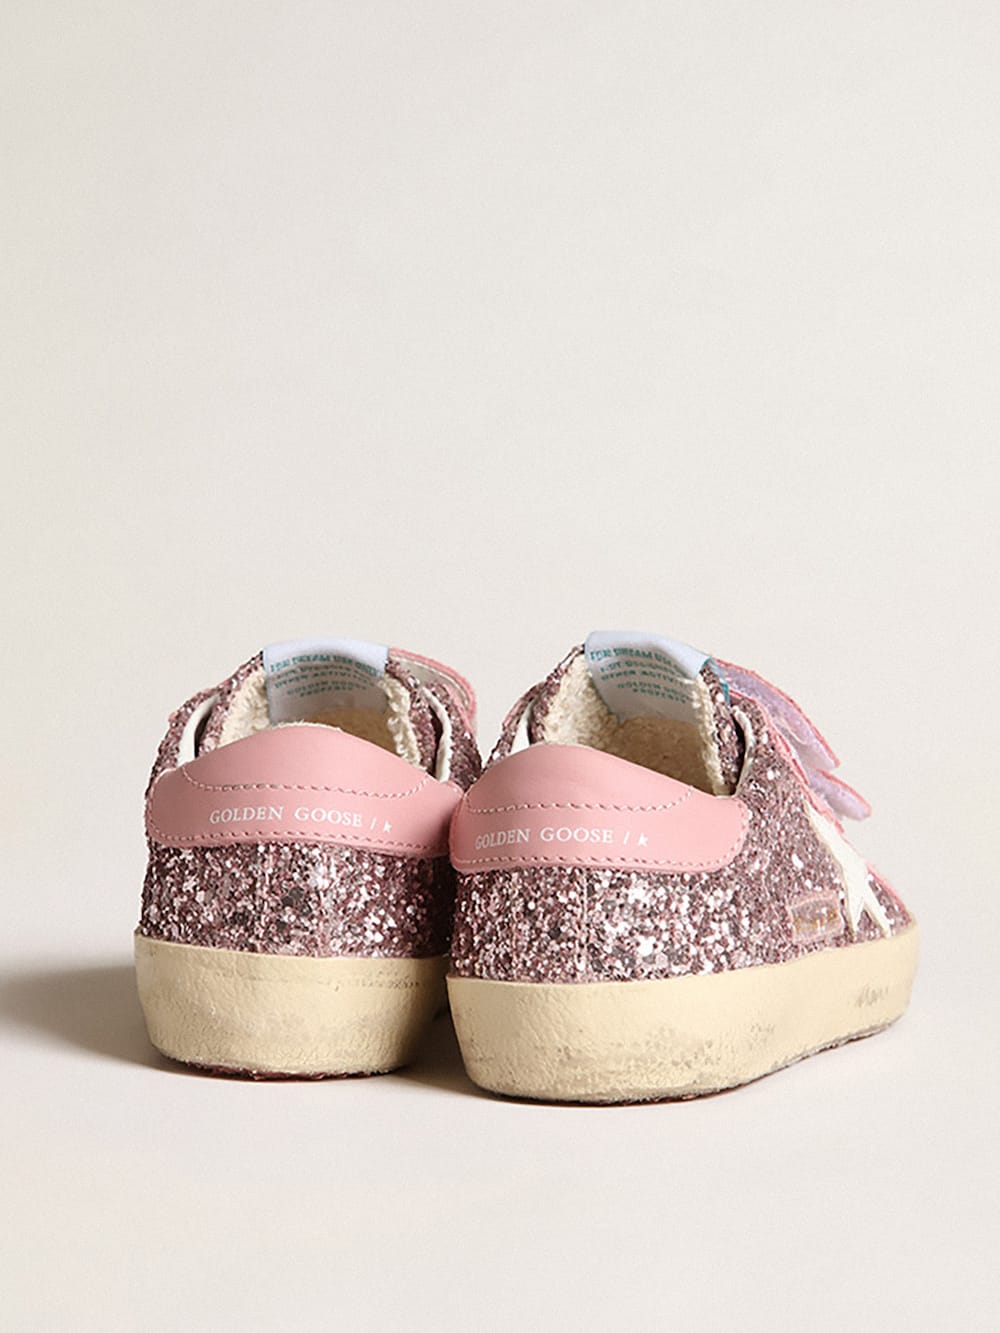 Golden Goose - Old School Junior in lilac glitter with white star and pink heel tab in 